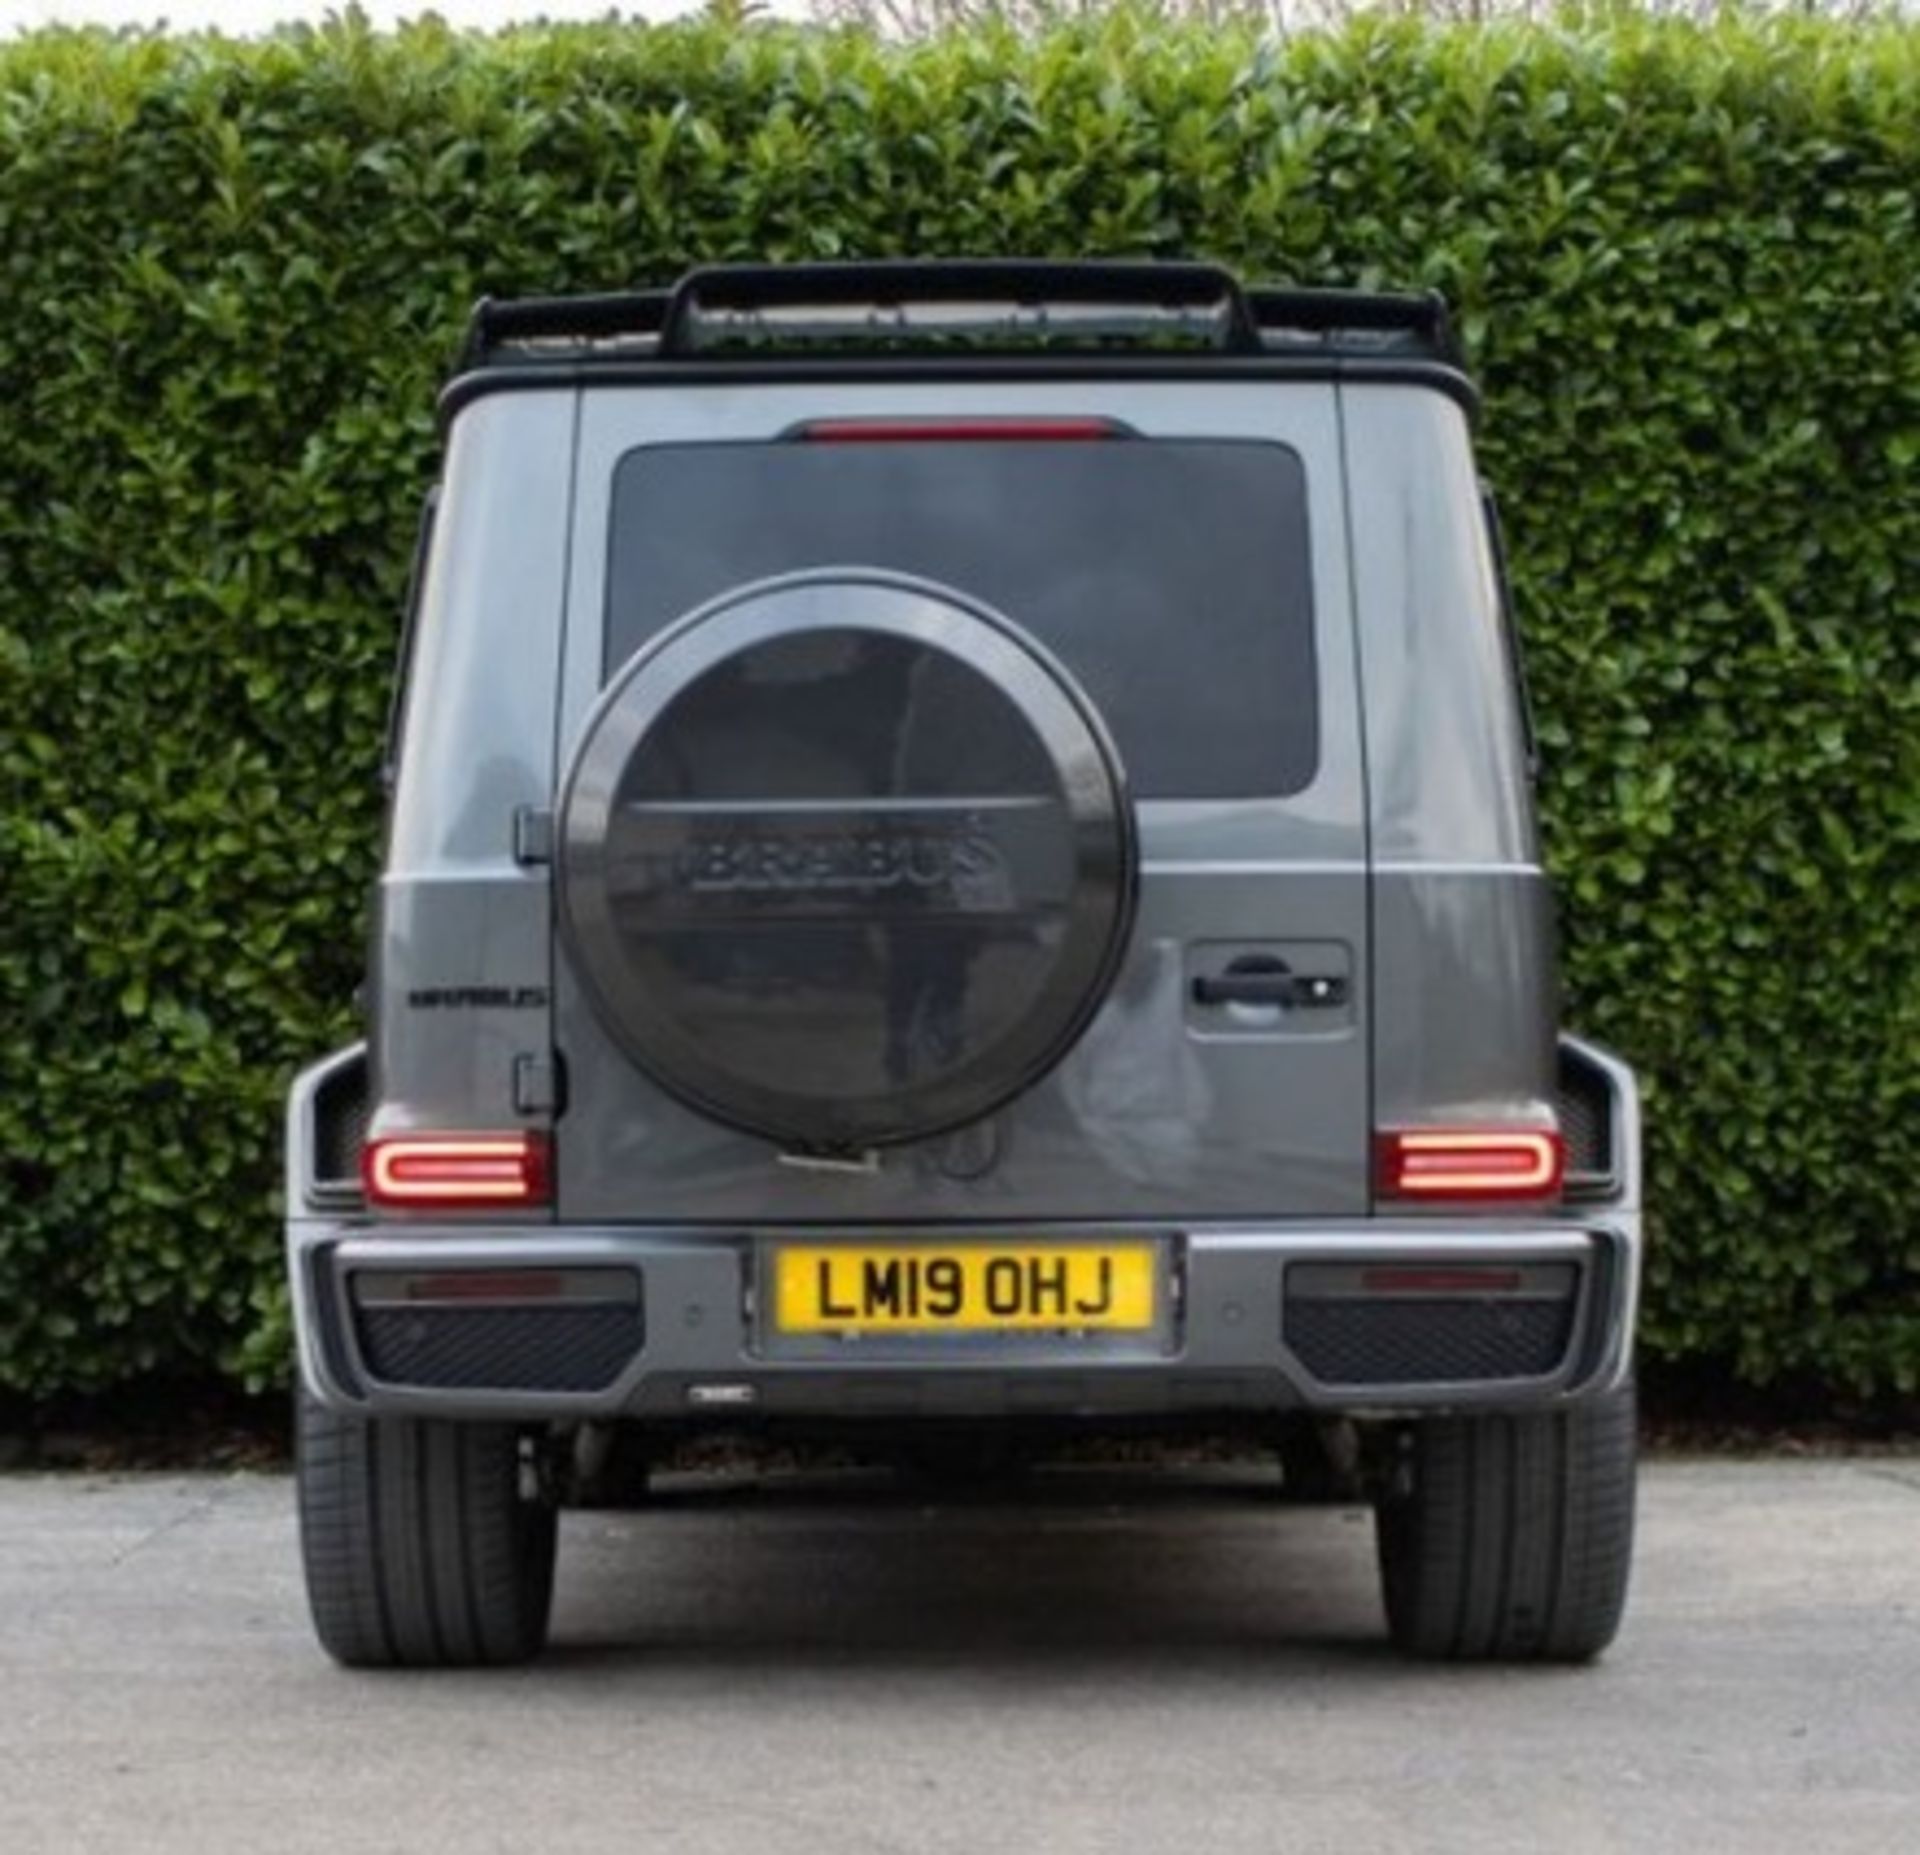 MERCEDES G63 BRABUS WIDE-STAR 800 STYLING GREY WITH BLACK LEATHER INTERIOR - Image 4 of 27